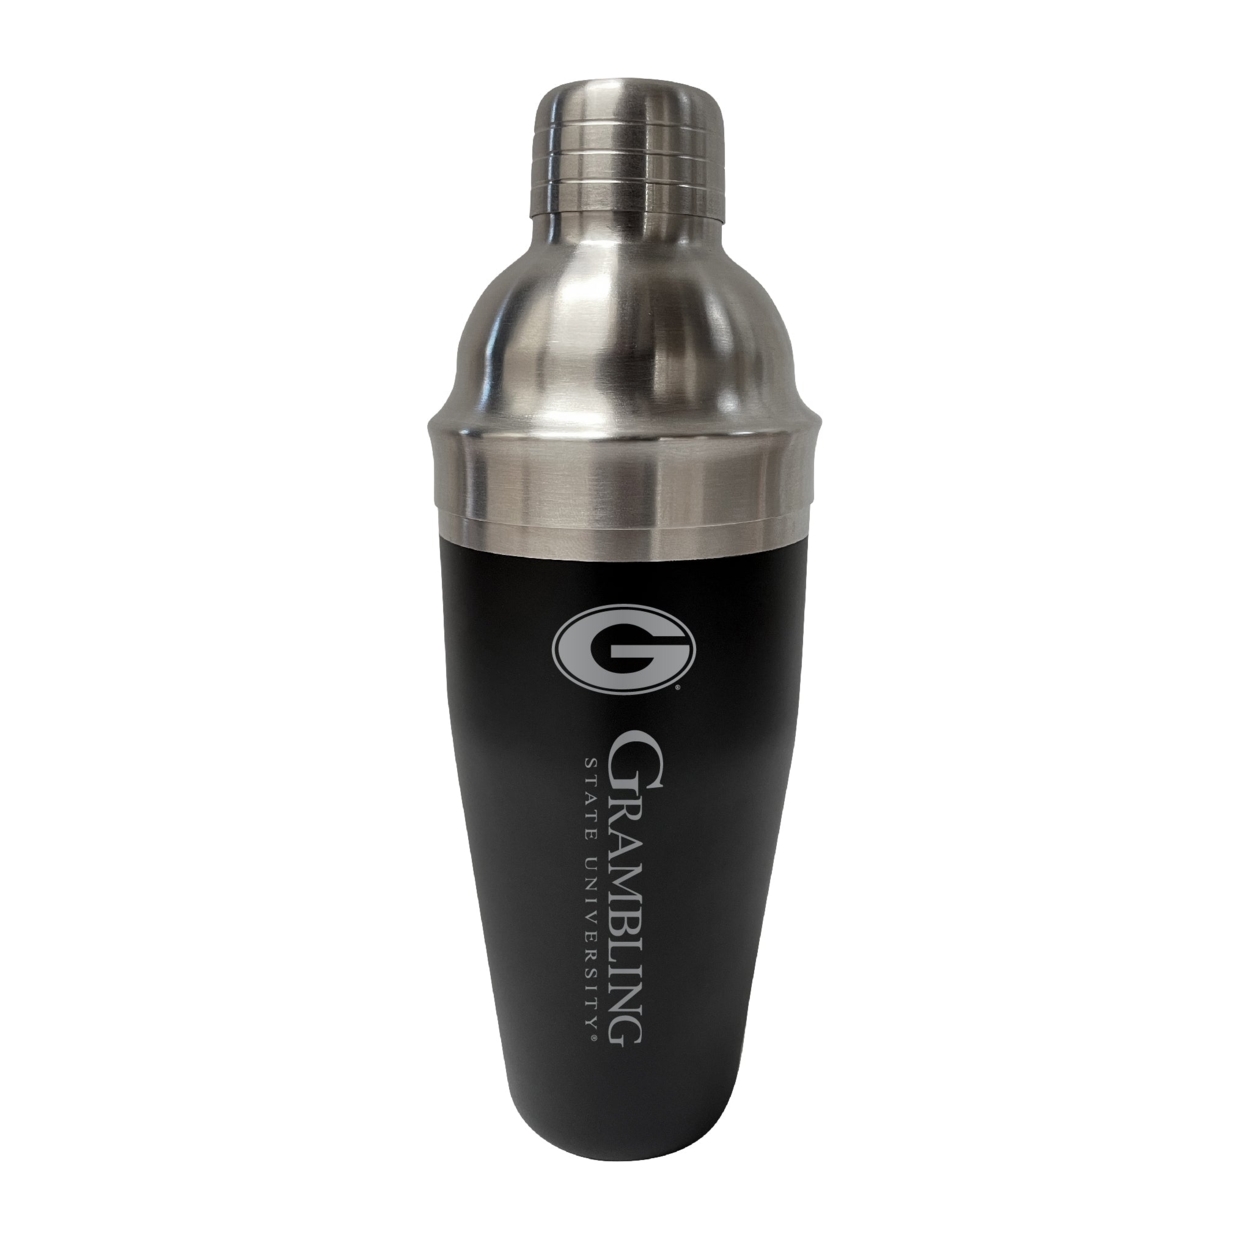 Grambling State Tigers 24 Oz Stainless Steel Cocktail Shaker